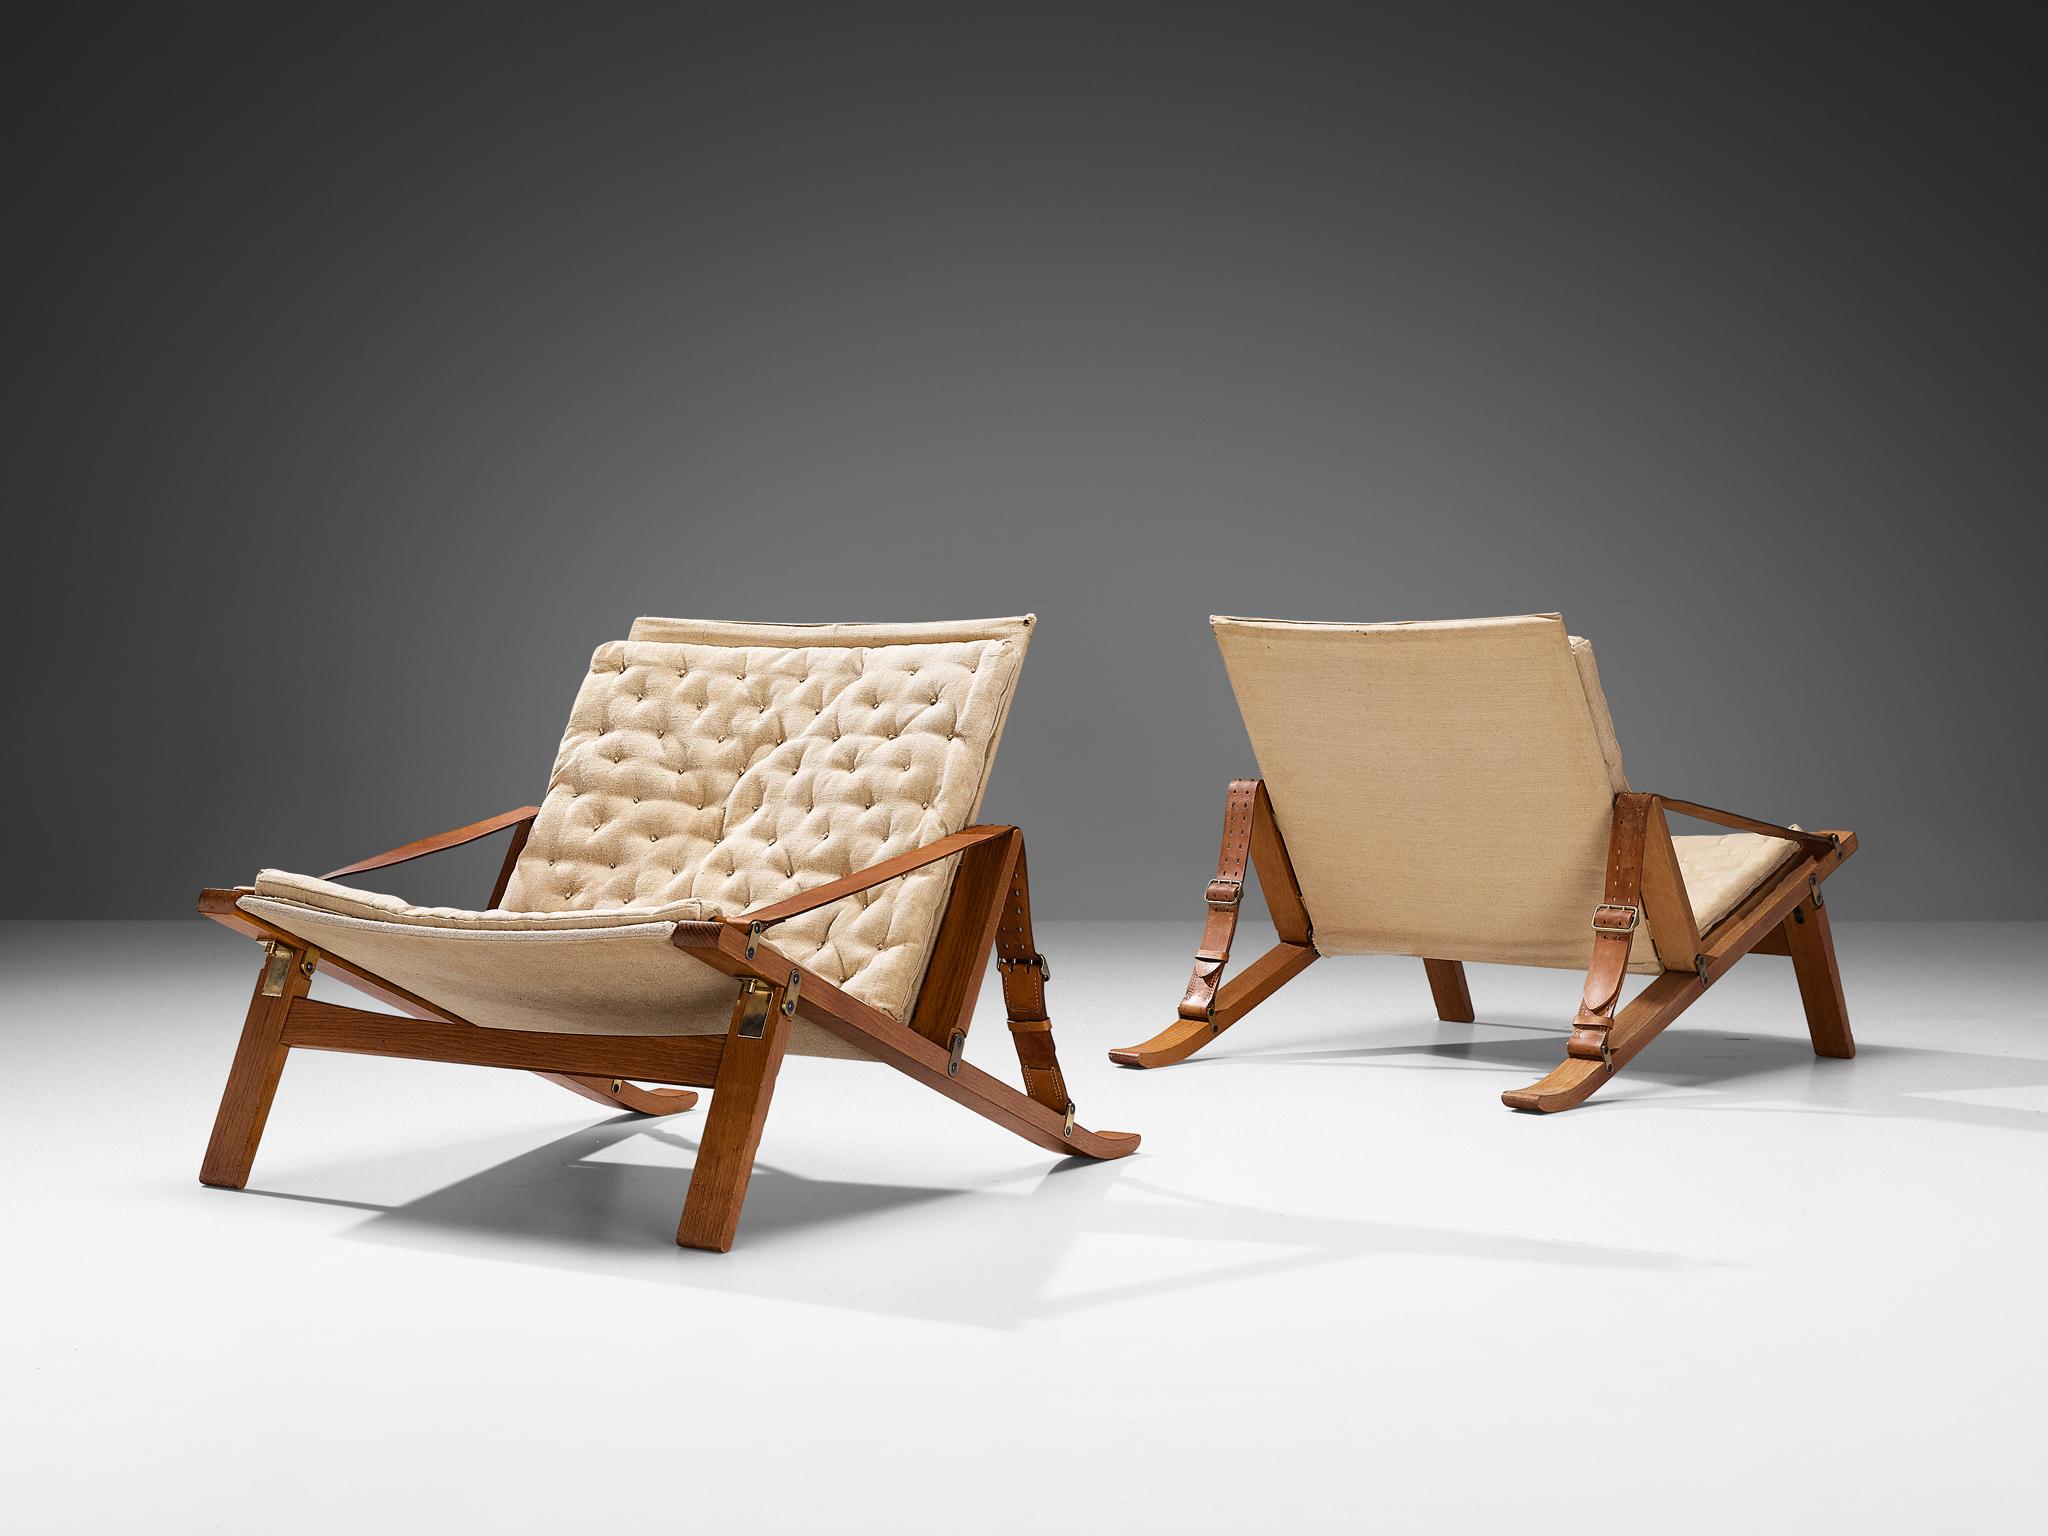 Jørgen Kastholm & Preben Fabricius for Poul Bachmann, pair of folding lounge chairs, model ‘PB10’, oak, leather, canvas, brass, steel, rope, Denmark, 1963. 

Crafted in 1963 by the skilled cabinetmaker Poul Bachmann, this folding easy chair bears